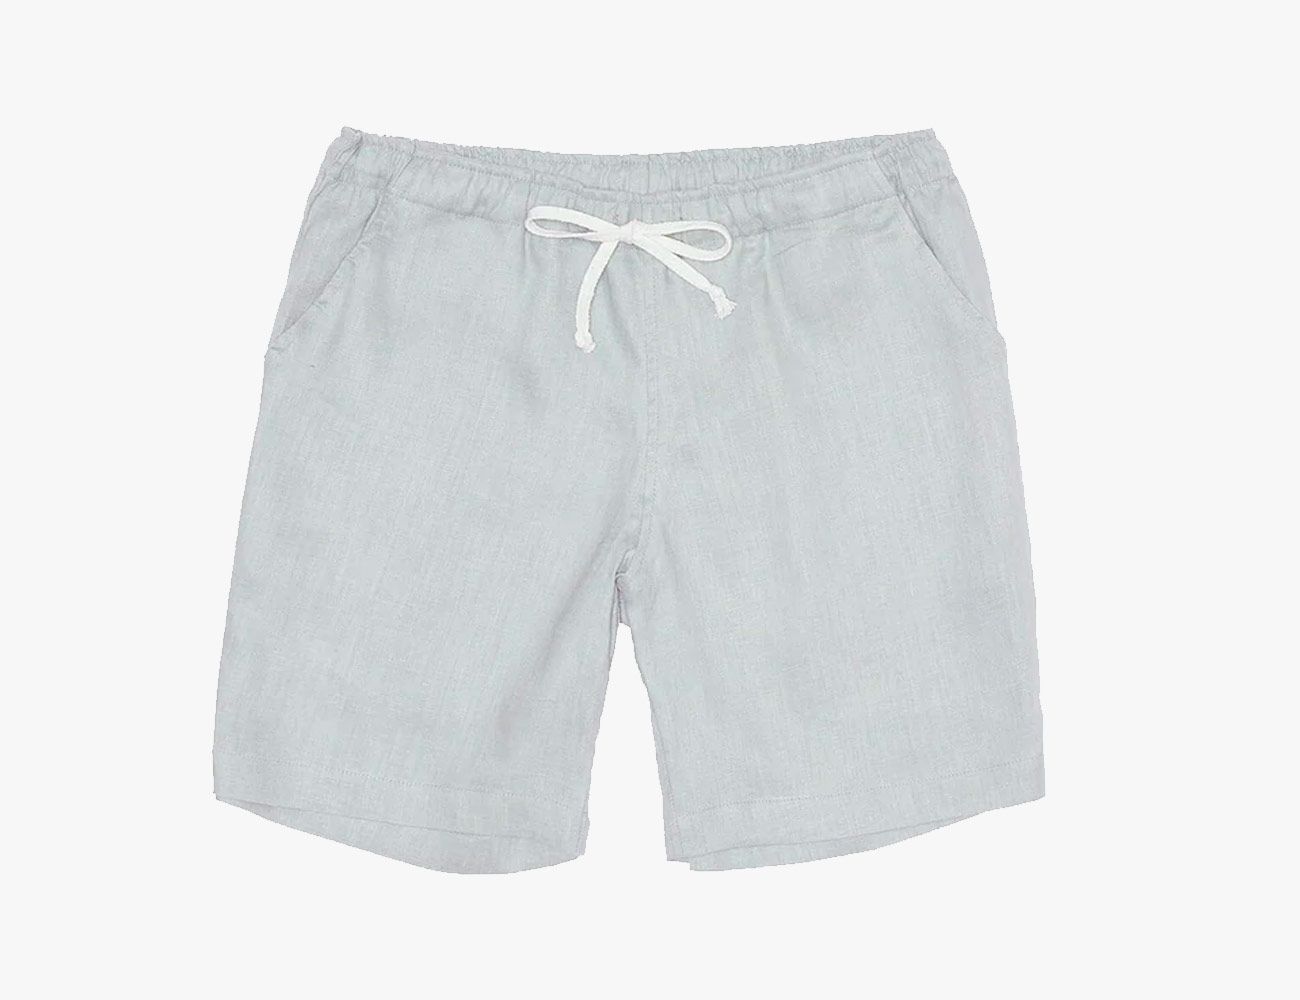 The Best Casual Shorts for Men